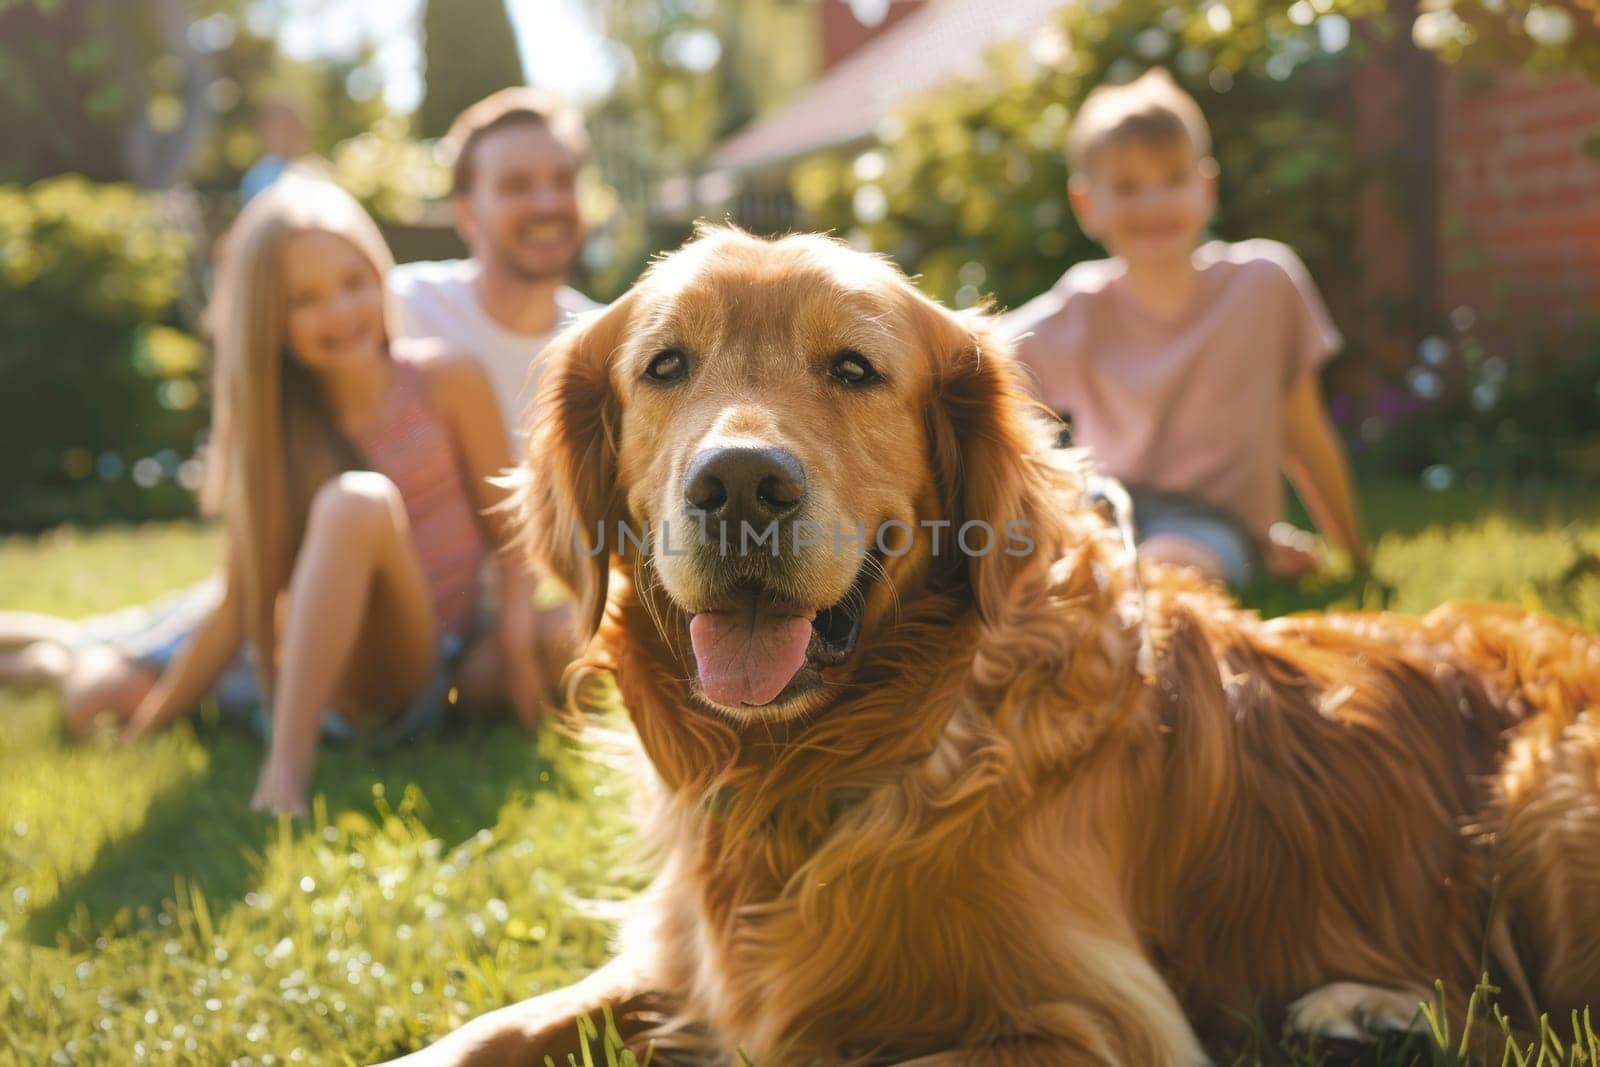 A woman and two children are playing with a golden retriever in a grassy yard by AI generated image by wichayada